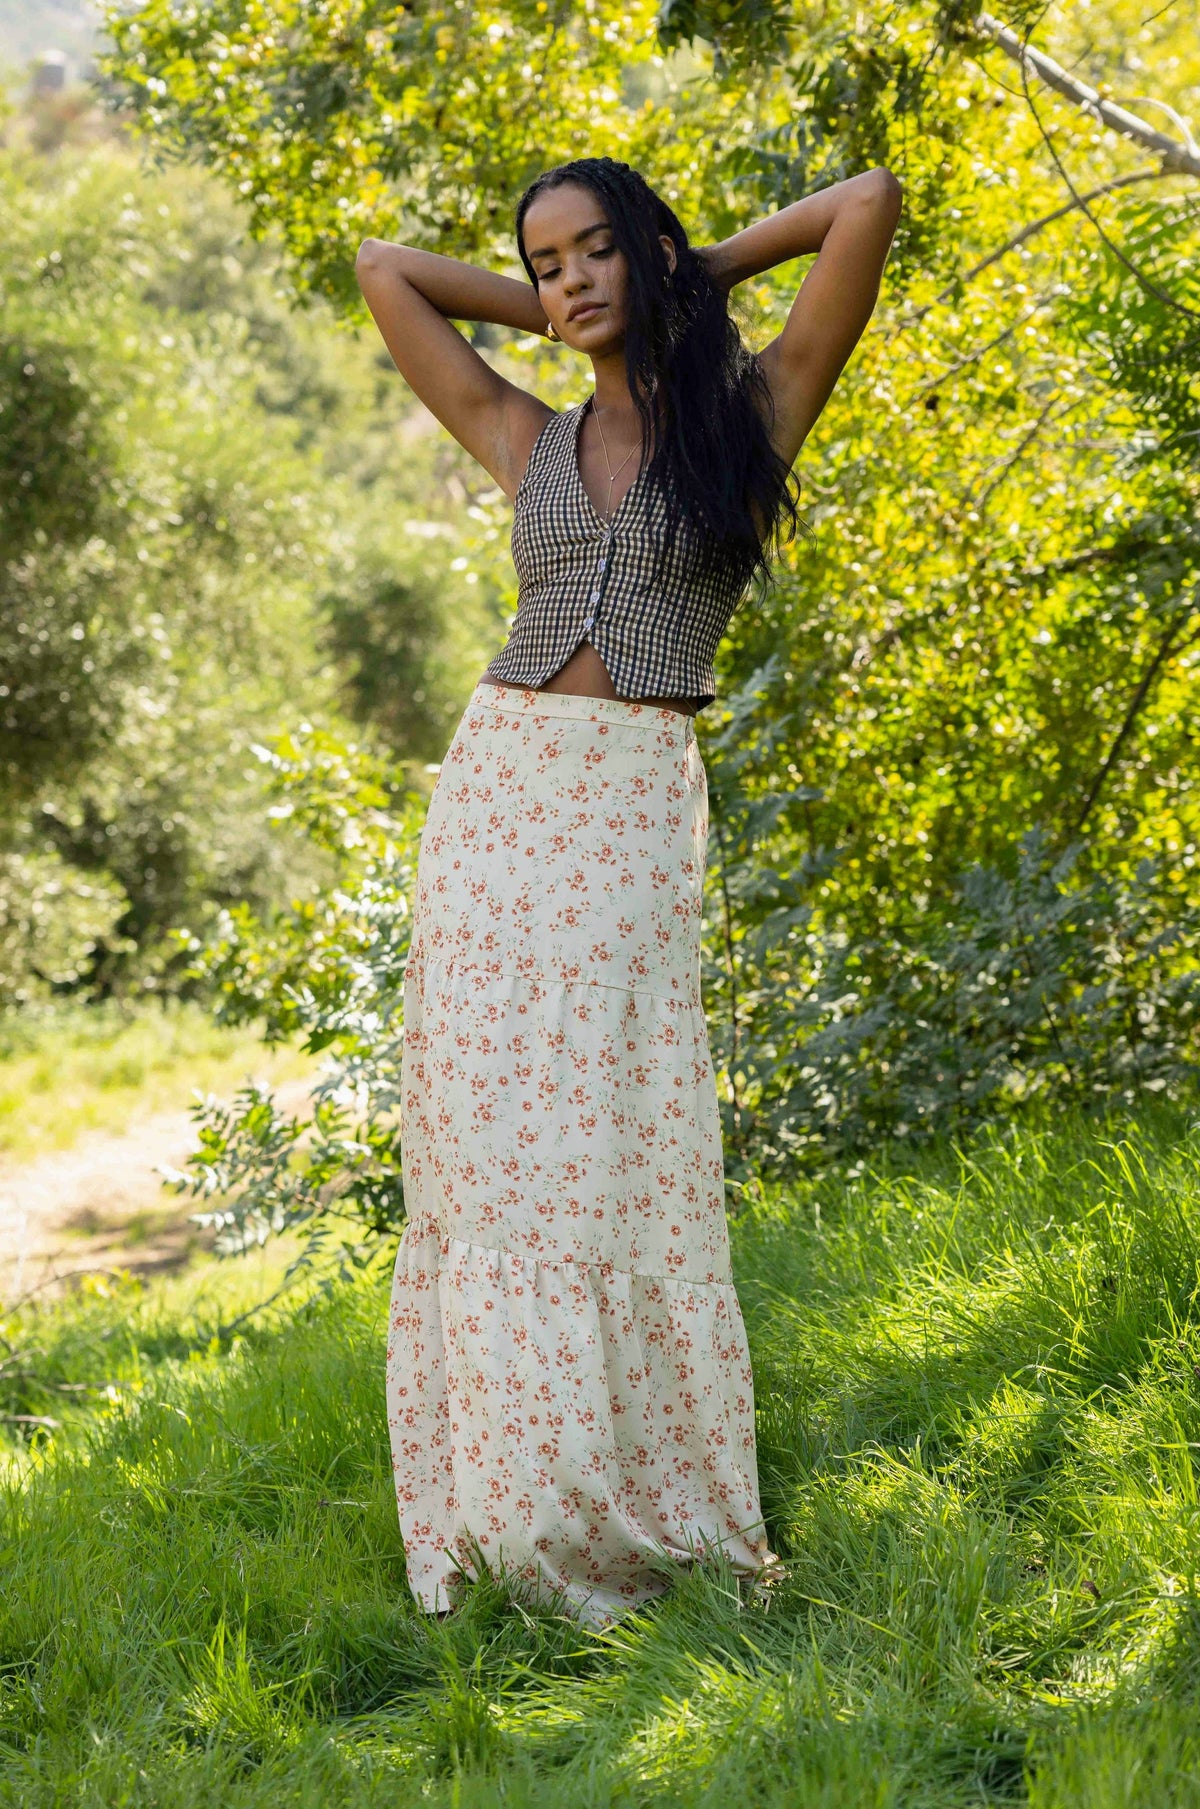 This is an image of Jamie Skirt in Wildflower - RESA featuring a model wearing the dress